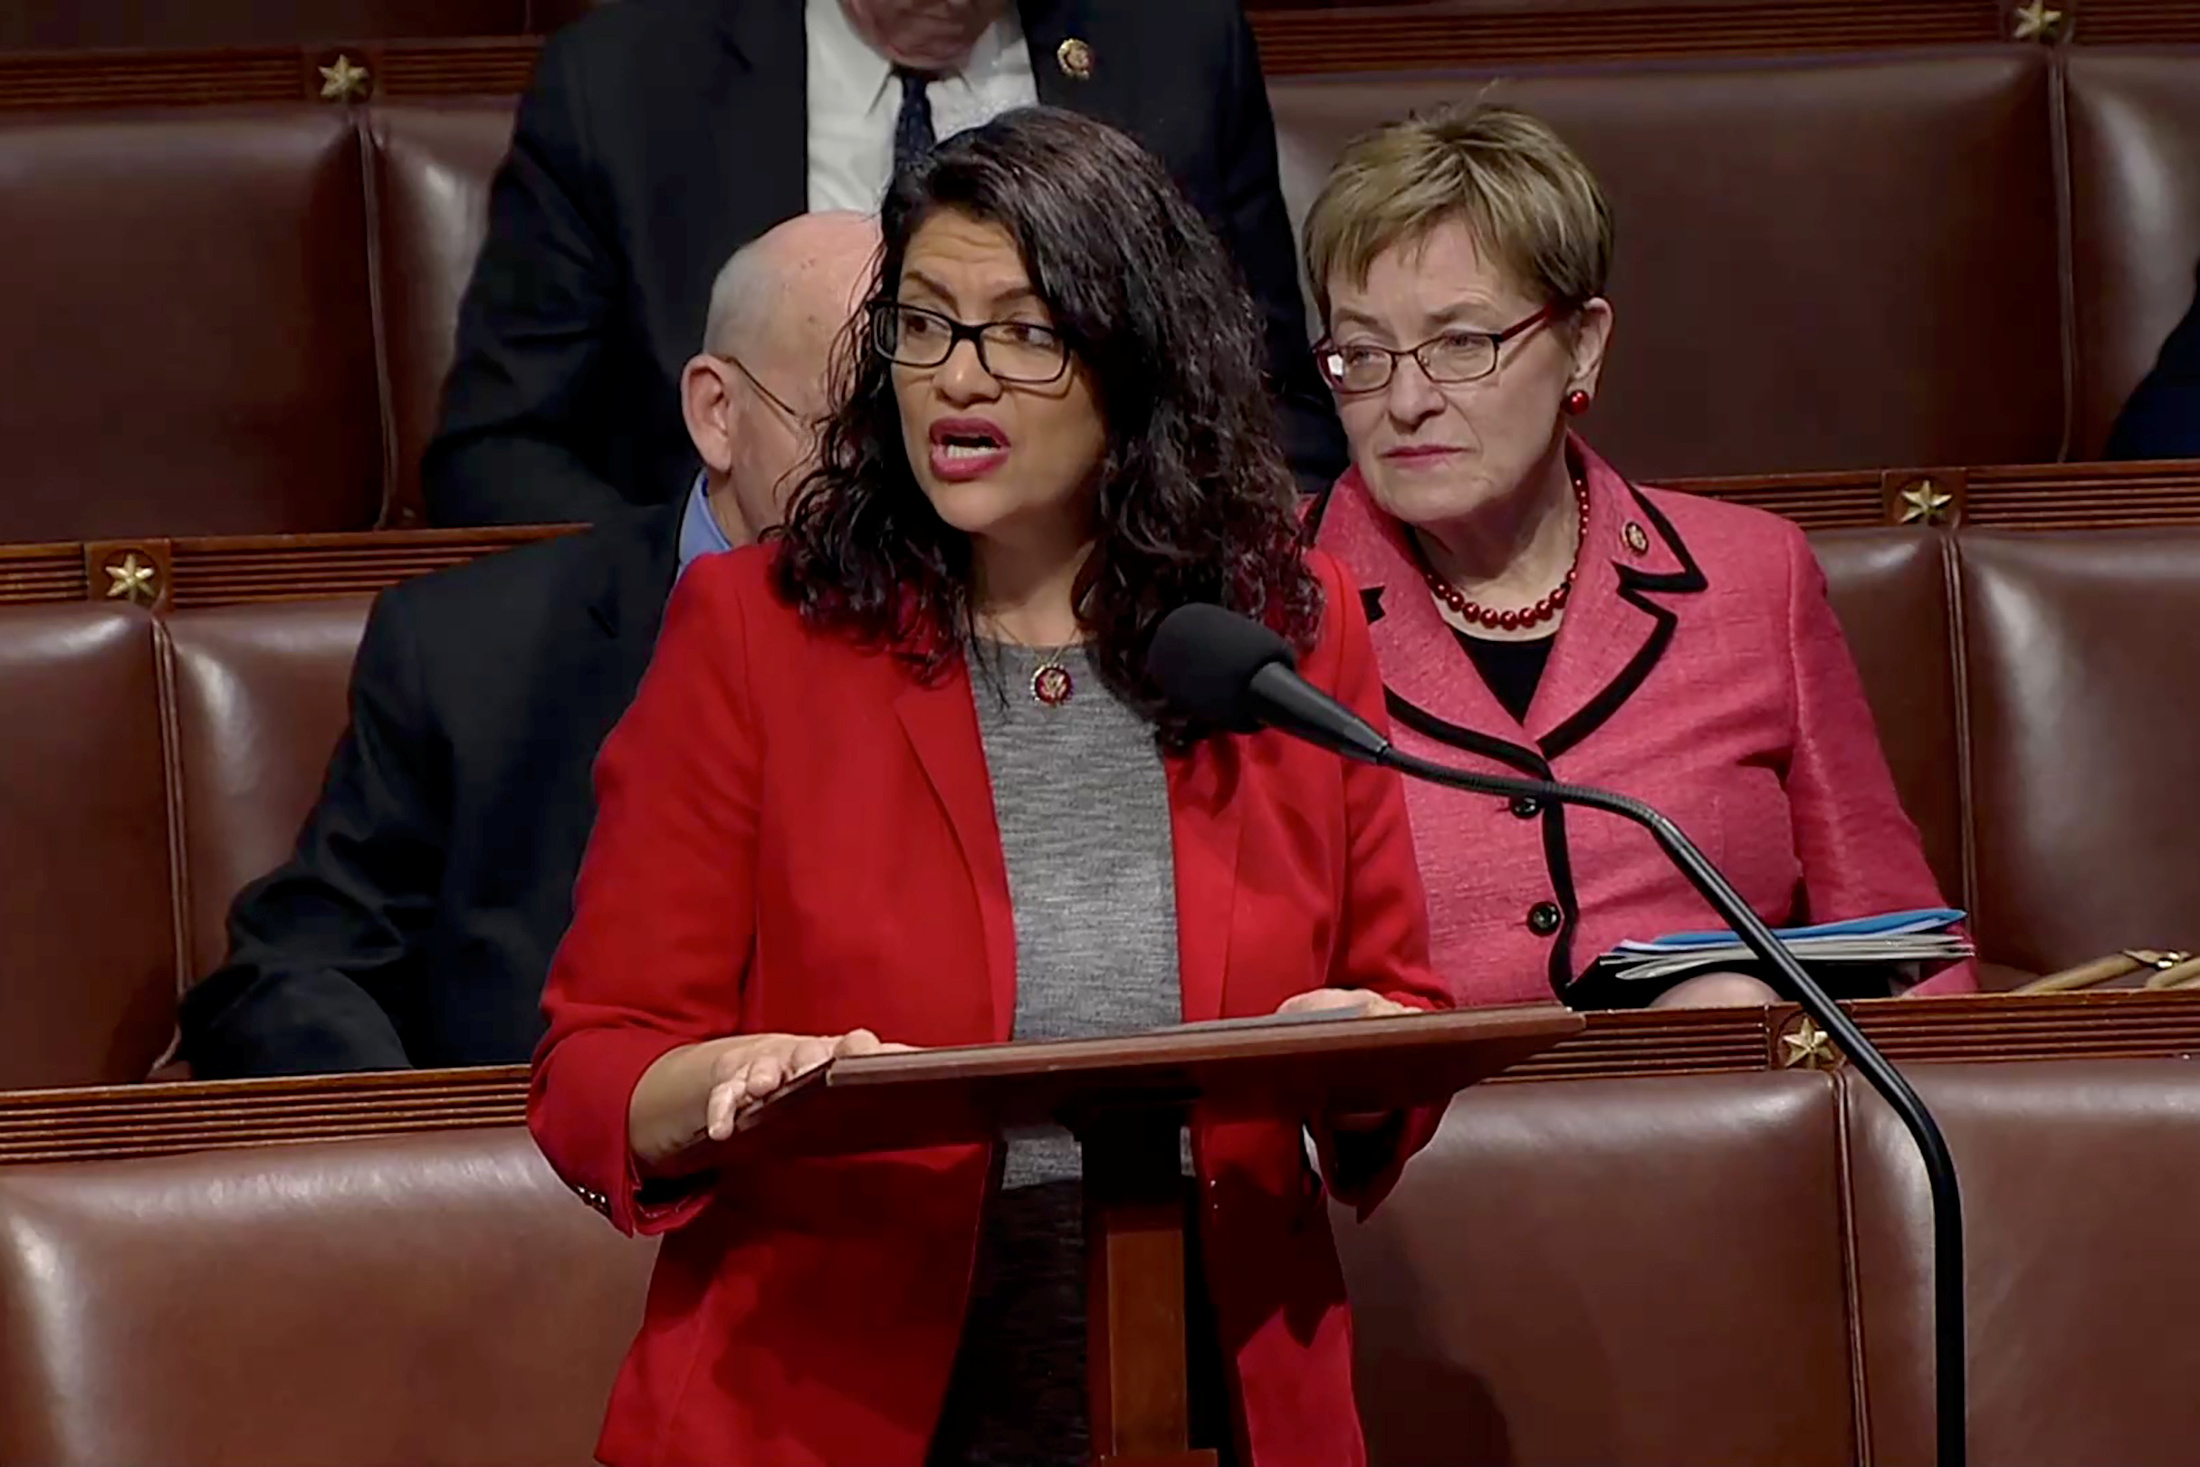 PHOTO: Rep. Rashida Tlaib speaks ahead of a vote on two articles of impeachment against President Donald Trump on Capitol Hill in Washington, D.C., in a still image from video on Dec. 18, 2019.